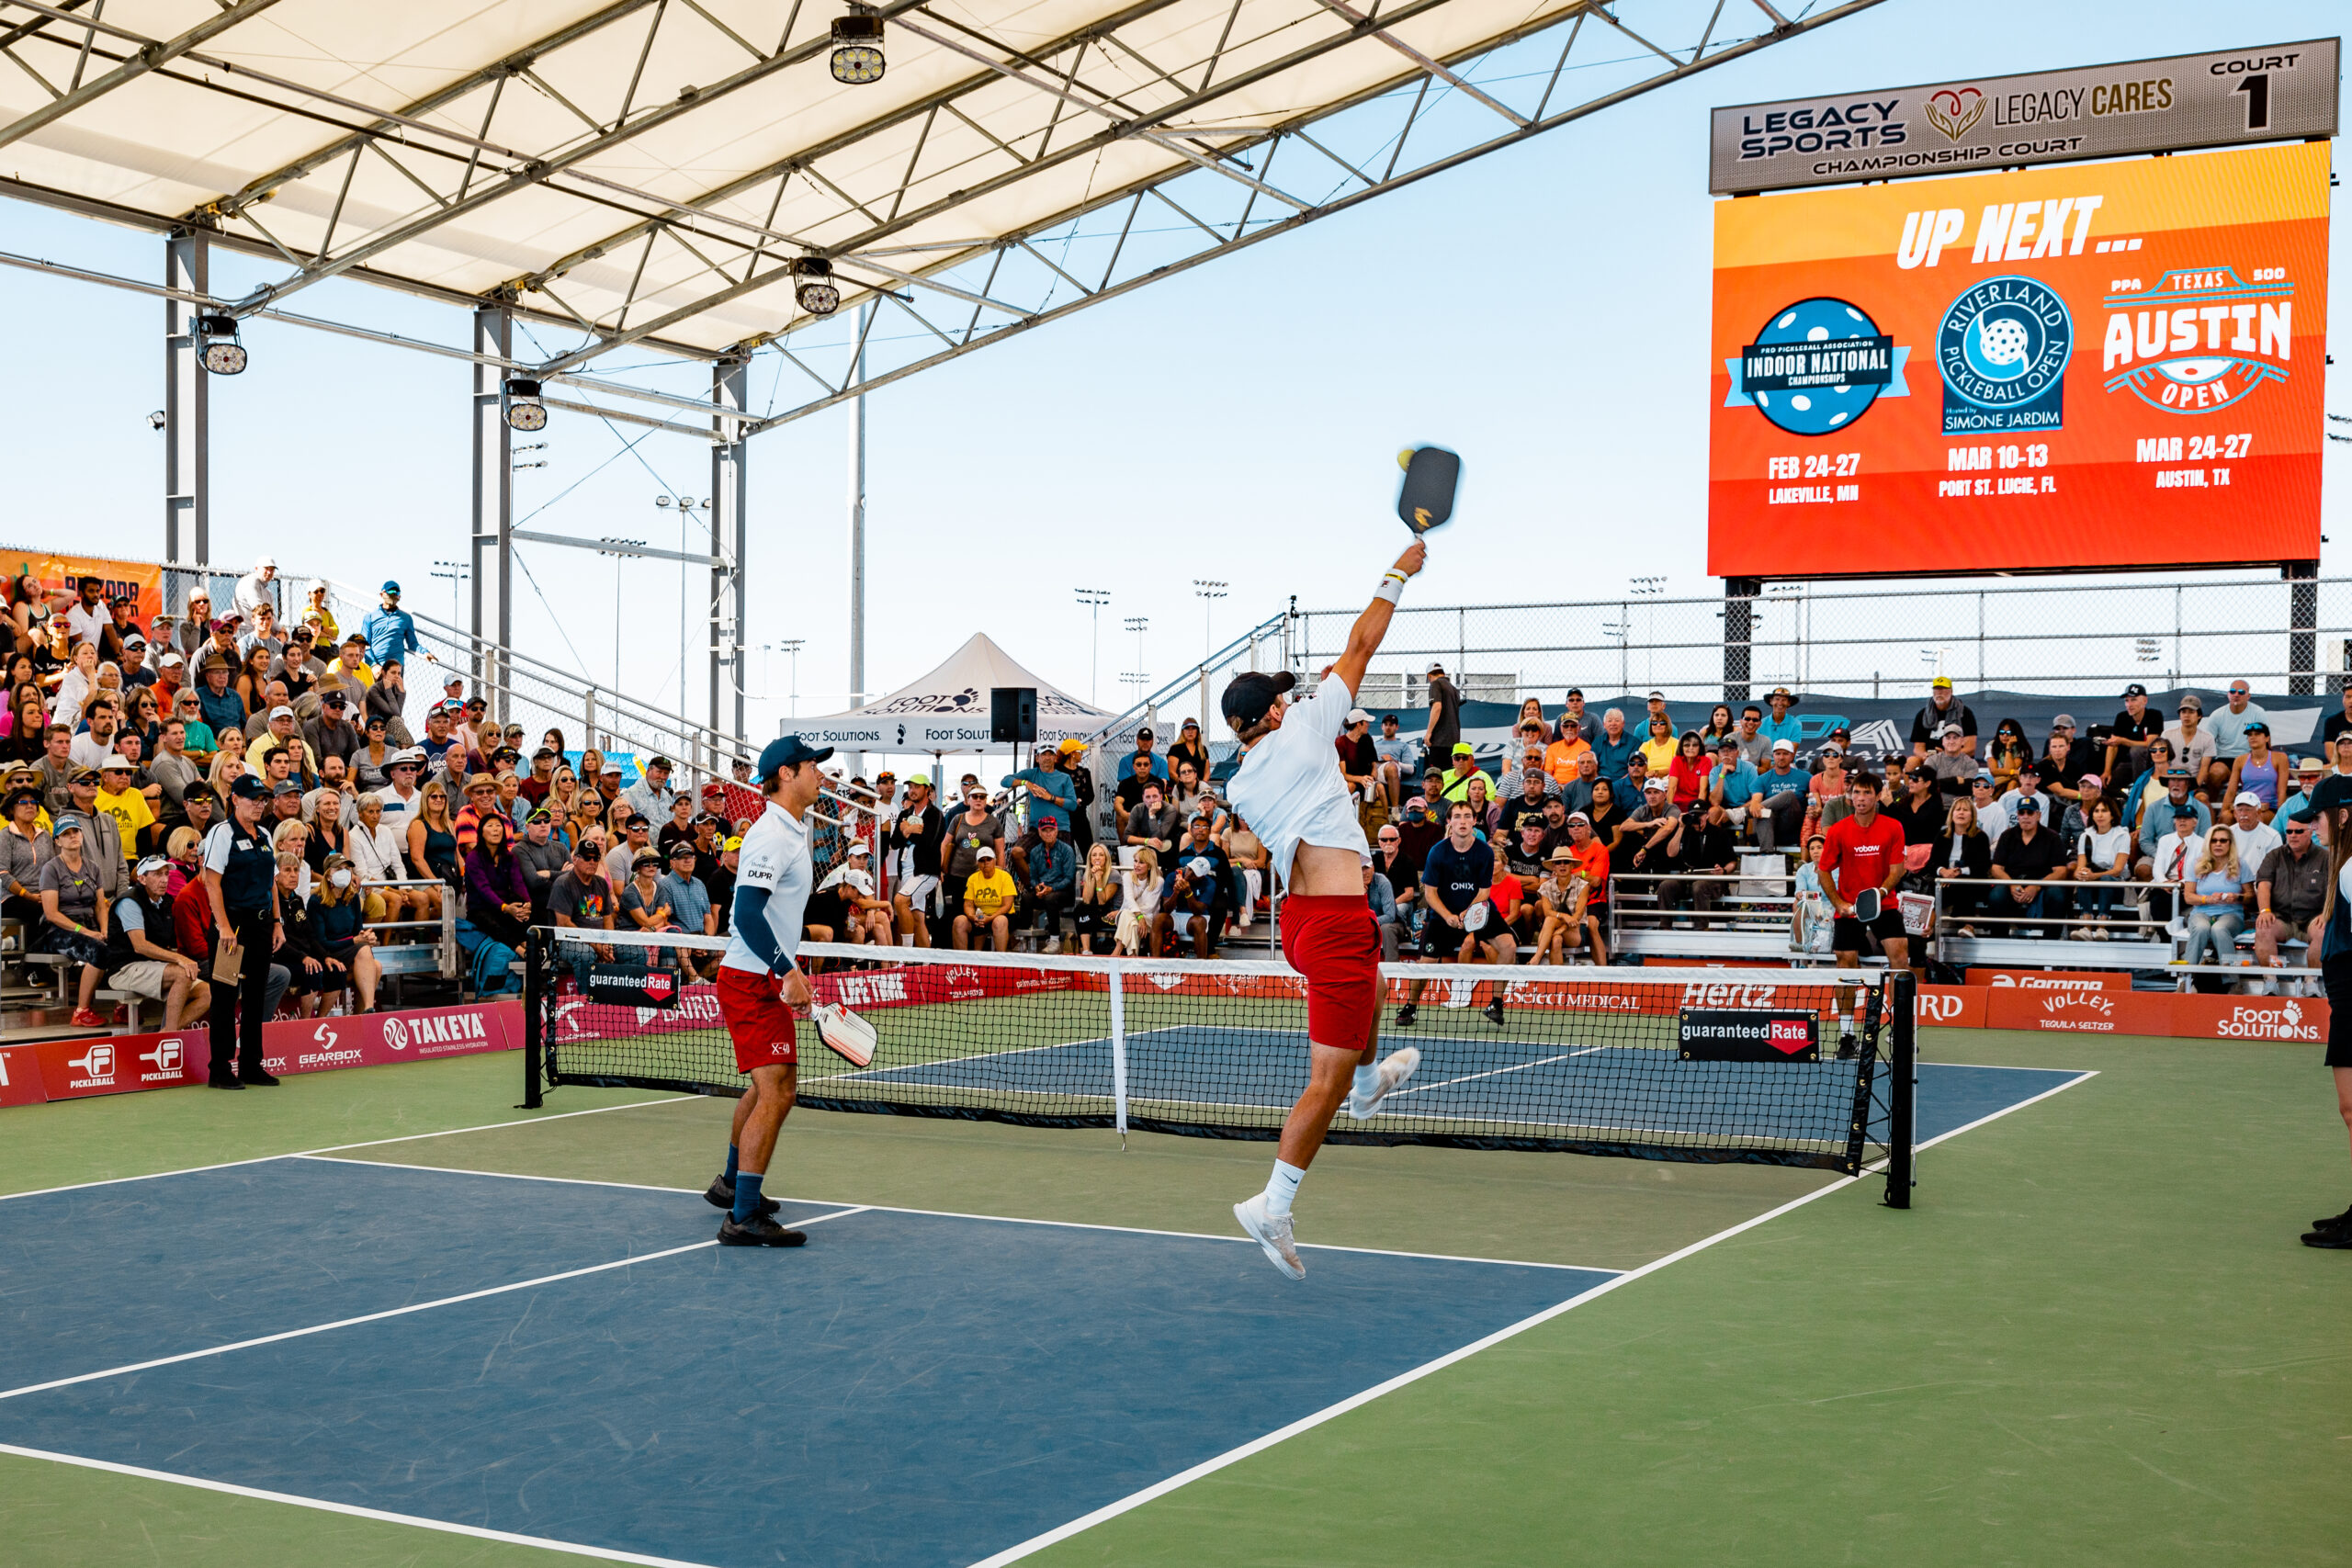 ORORO TO SPONSOR PRO PICKLEBALL TOURNAMENT IN COLLABORATION WITH THE